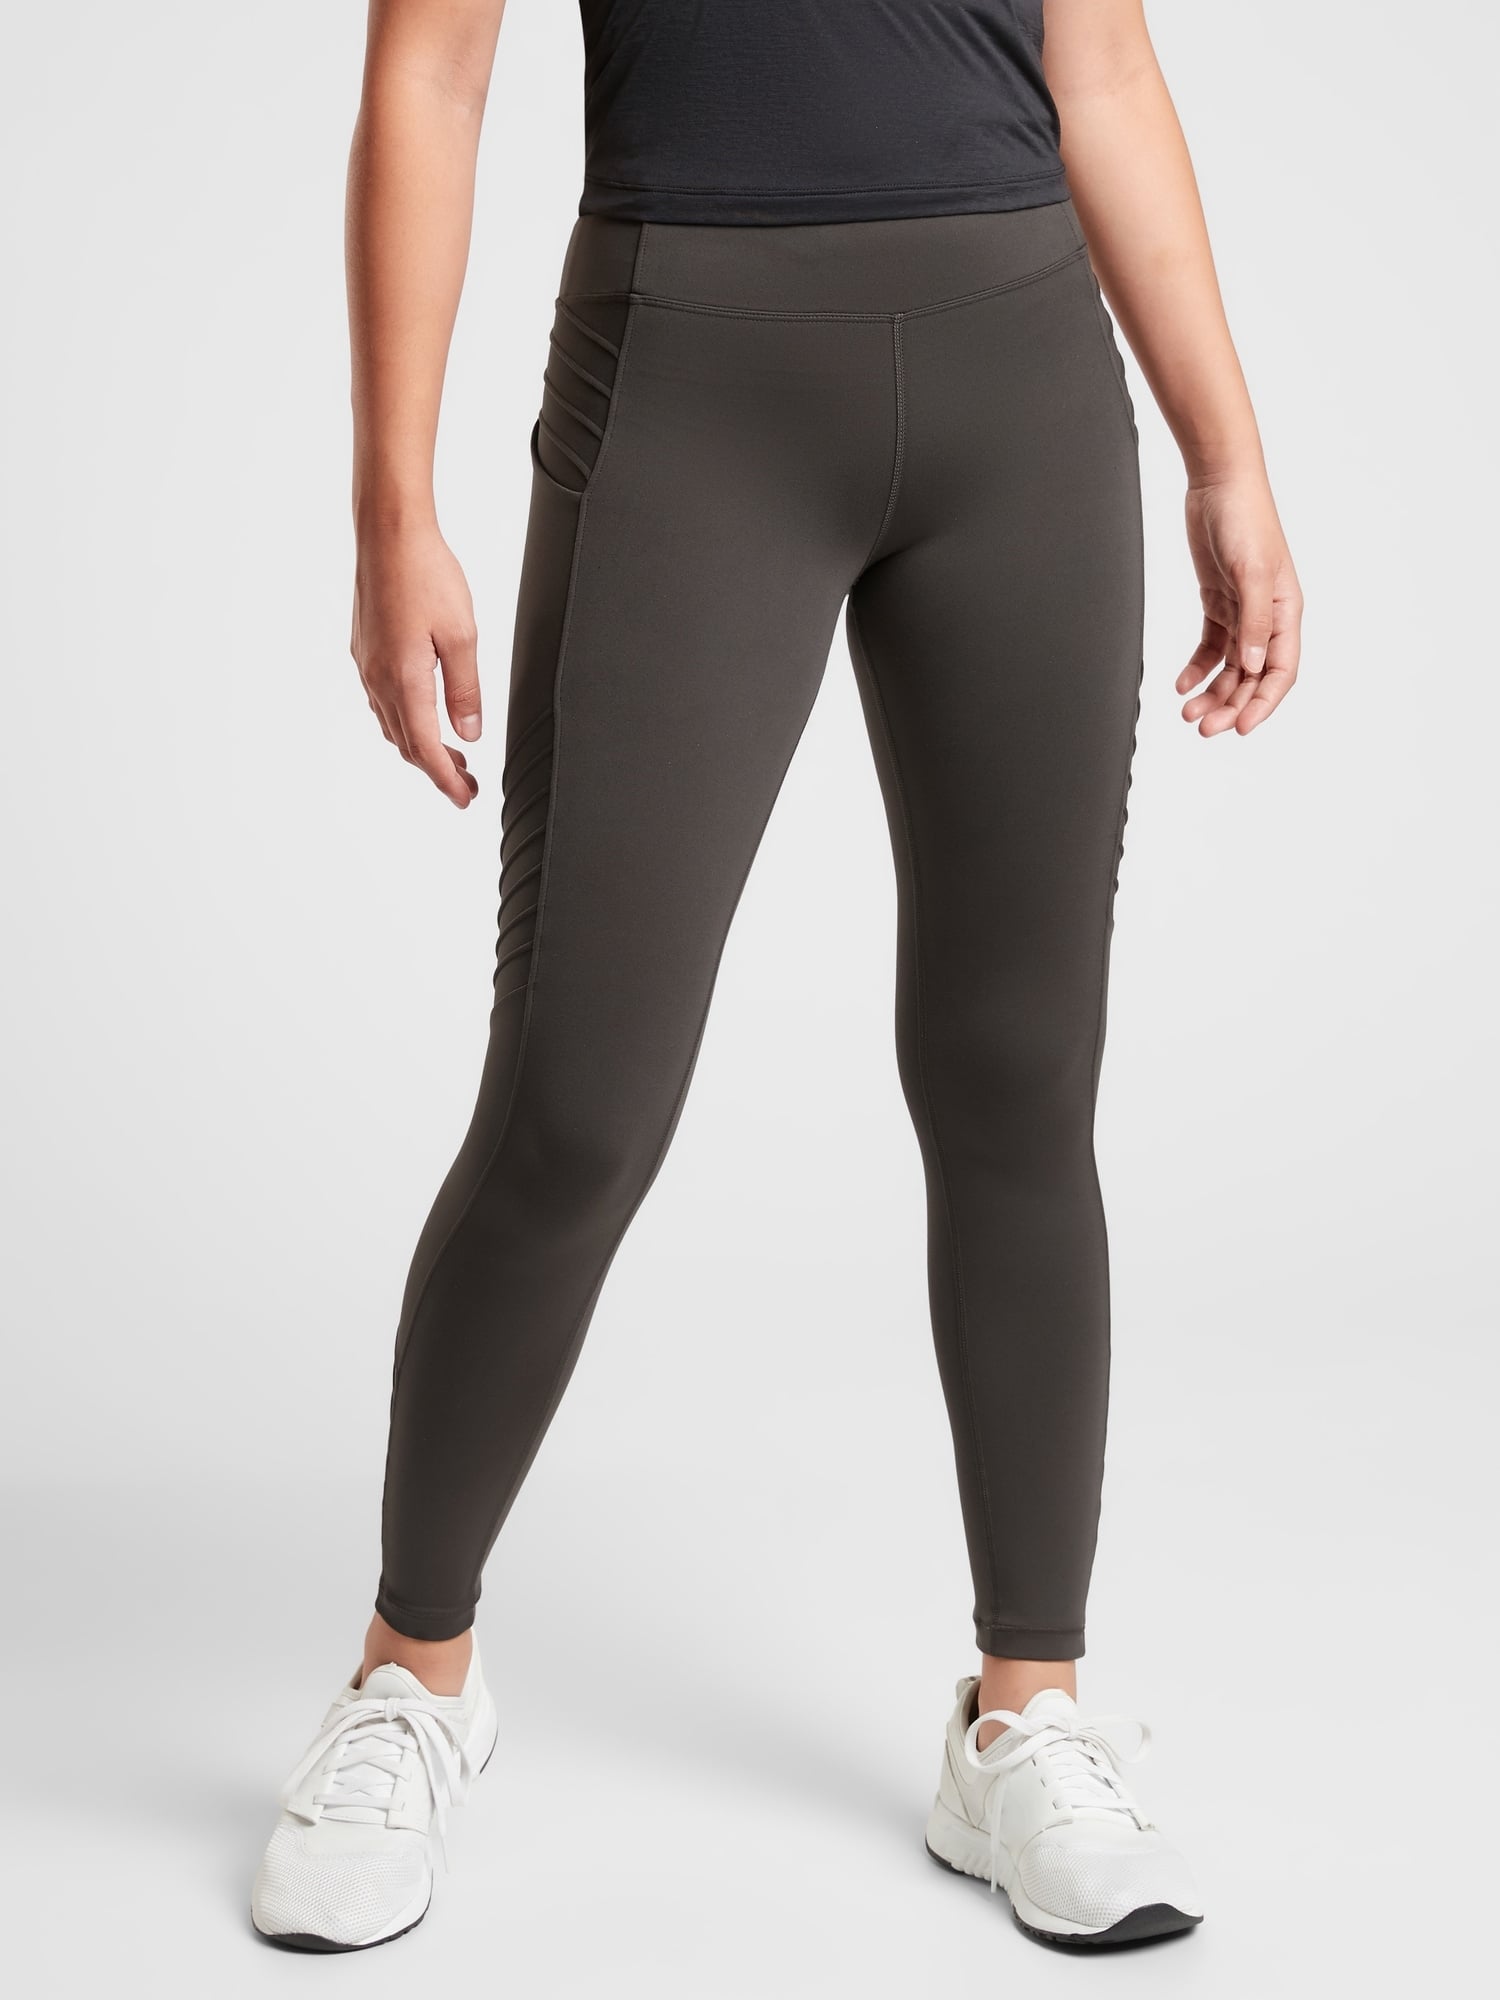 Athleta Girl Moto-vation 2.0 Tight, Gym Class Hero! This Brand Has the  Best Mother-Daughter Fitness Sets